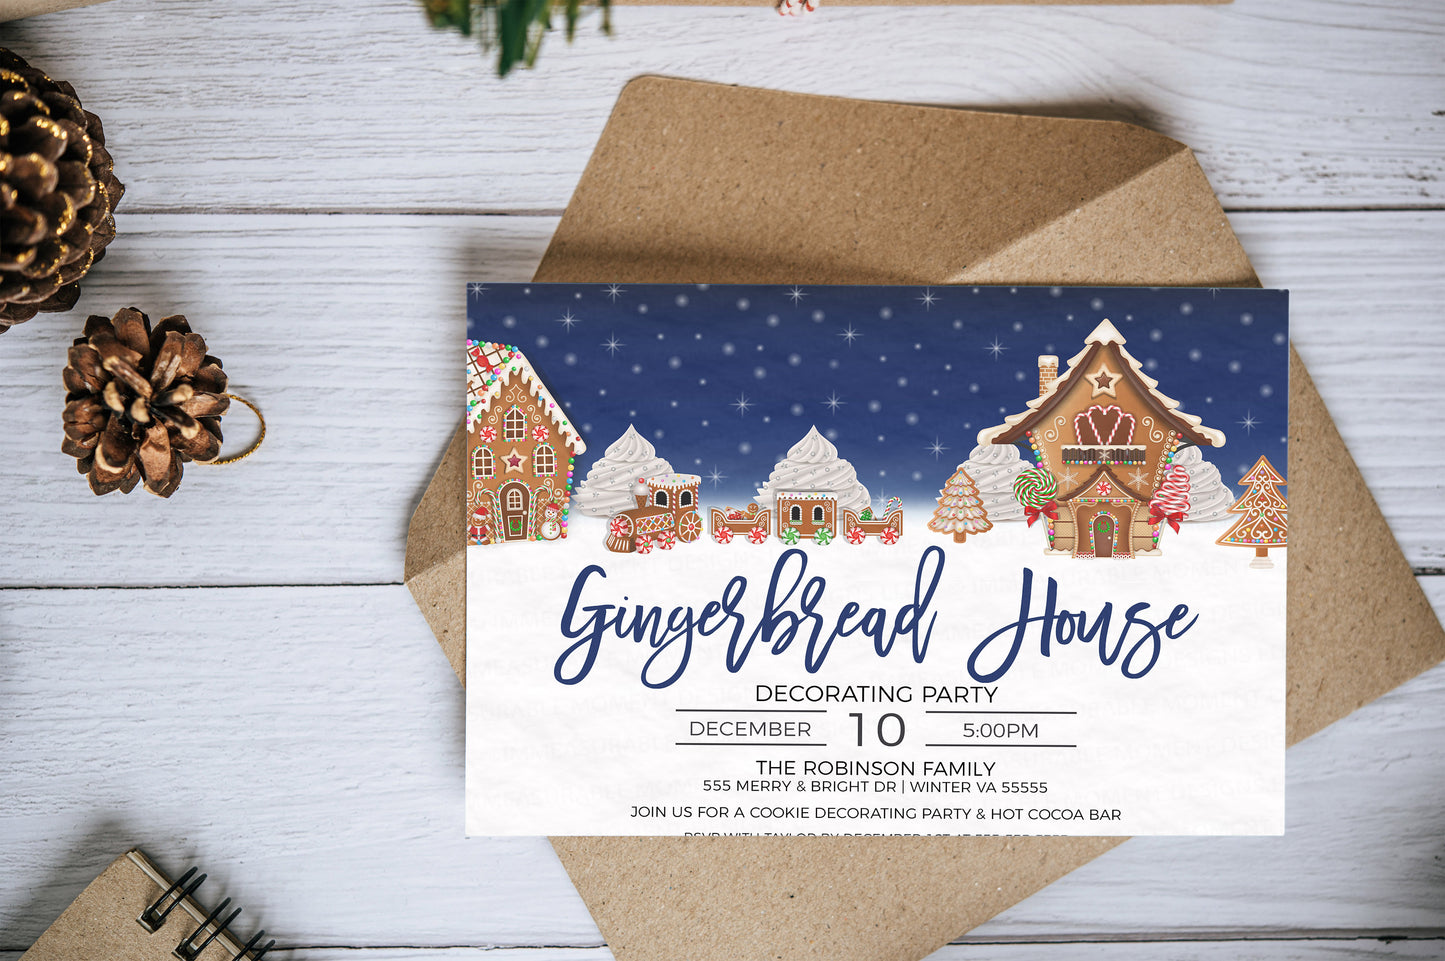 Gingerbread House Decorating Party Invitation, Editable Cookie Decorating Party, Hot Chocolate Bar, Birthday Party, DIY Printable Template